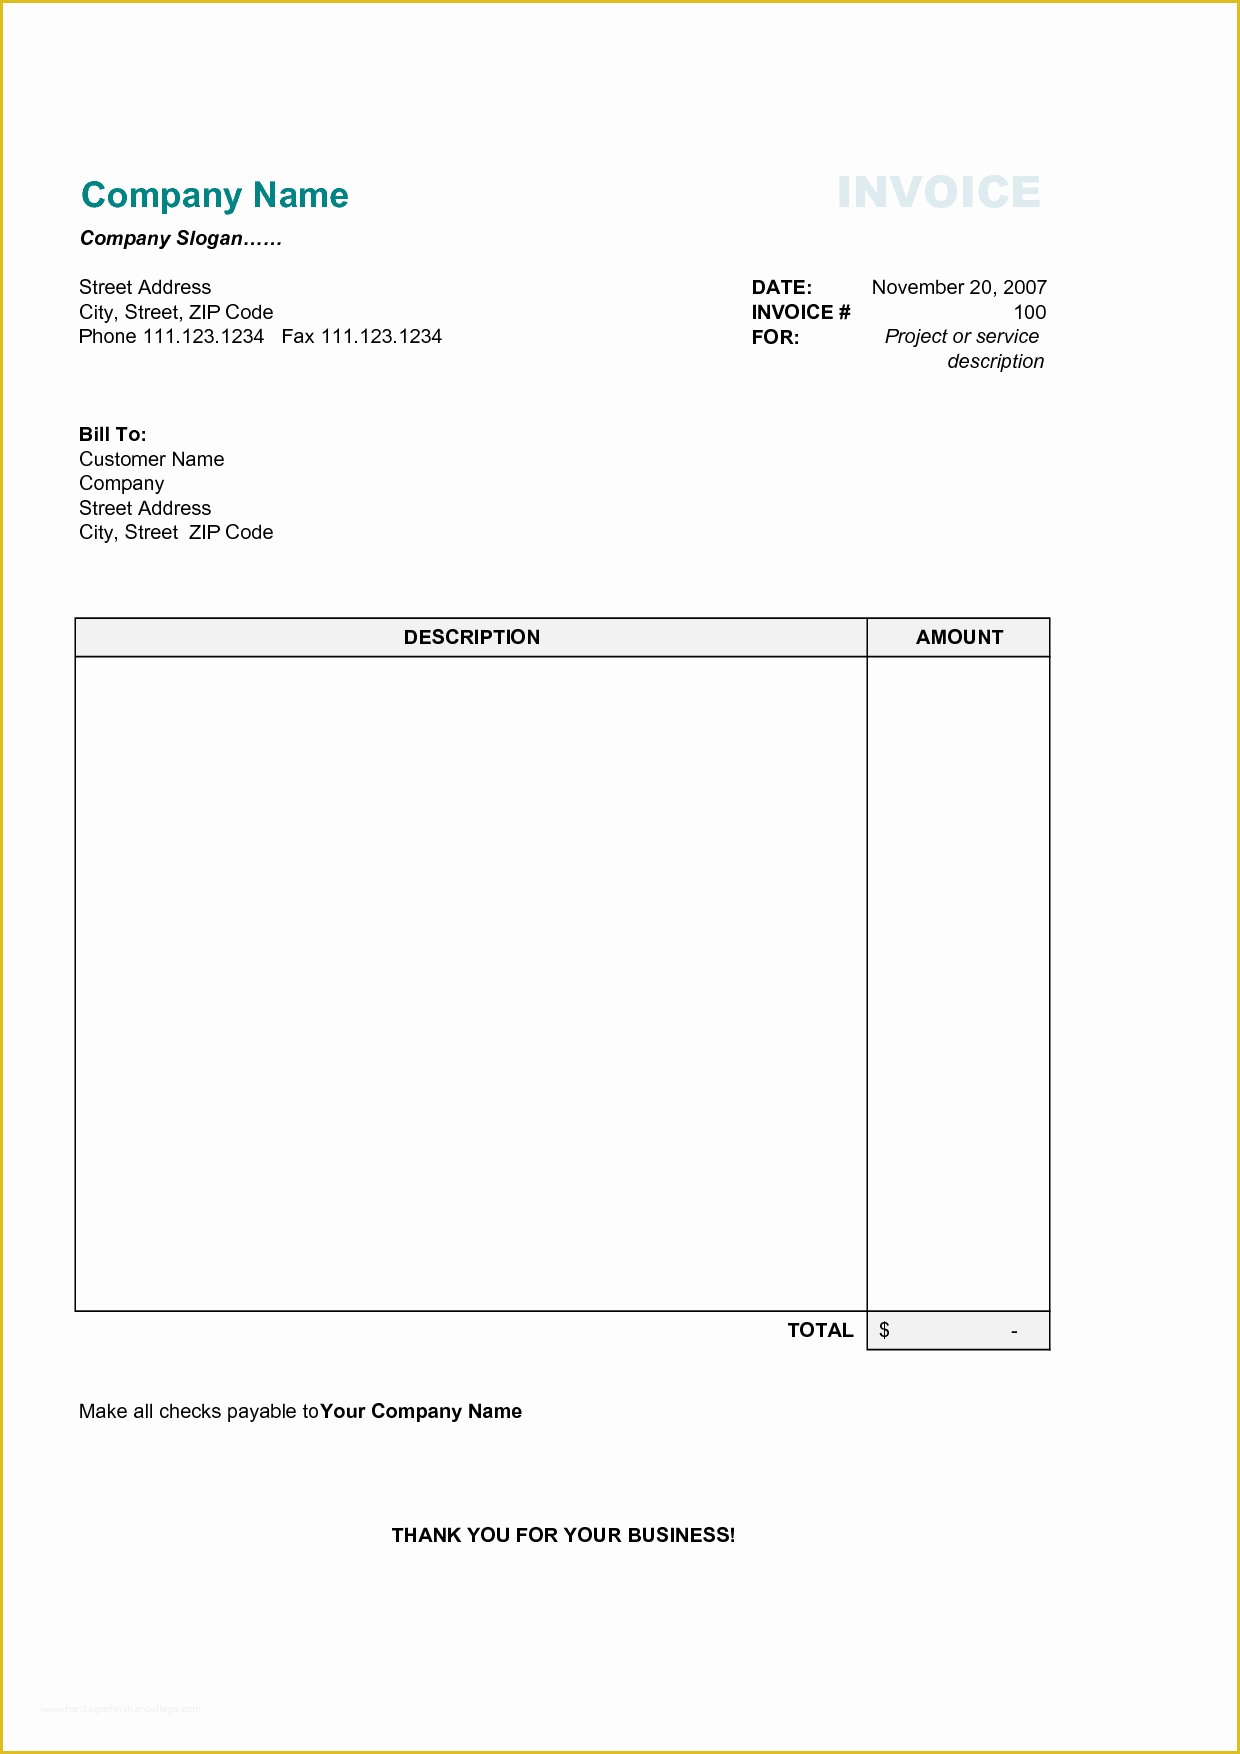 Business Invoice Template Free Of Invoice Template Category Page 1 Efoza